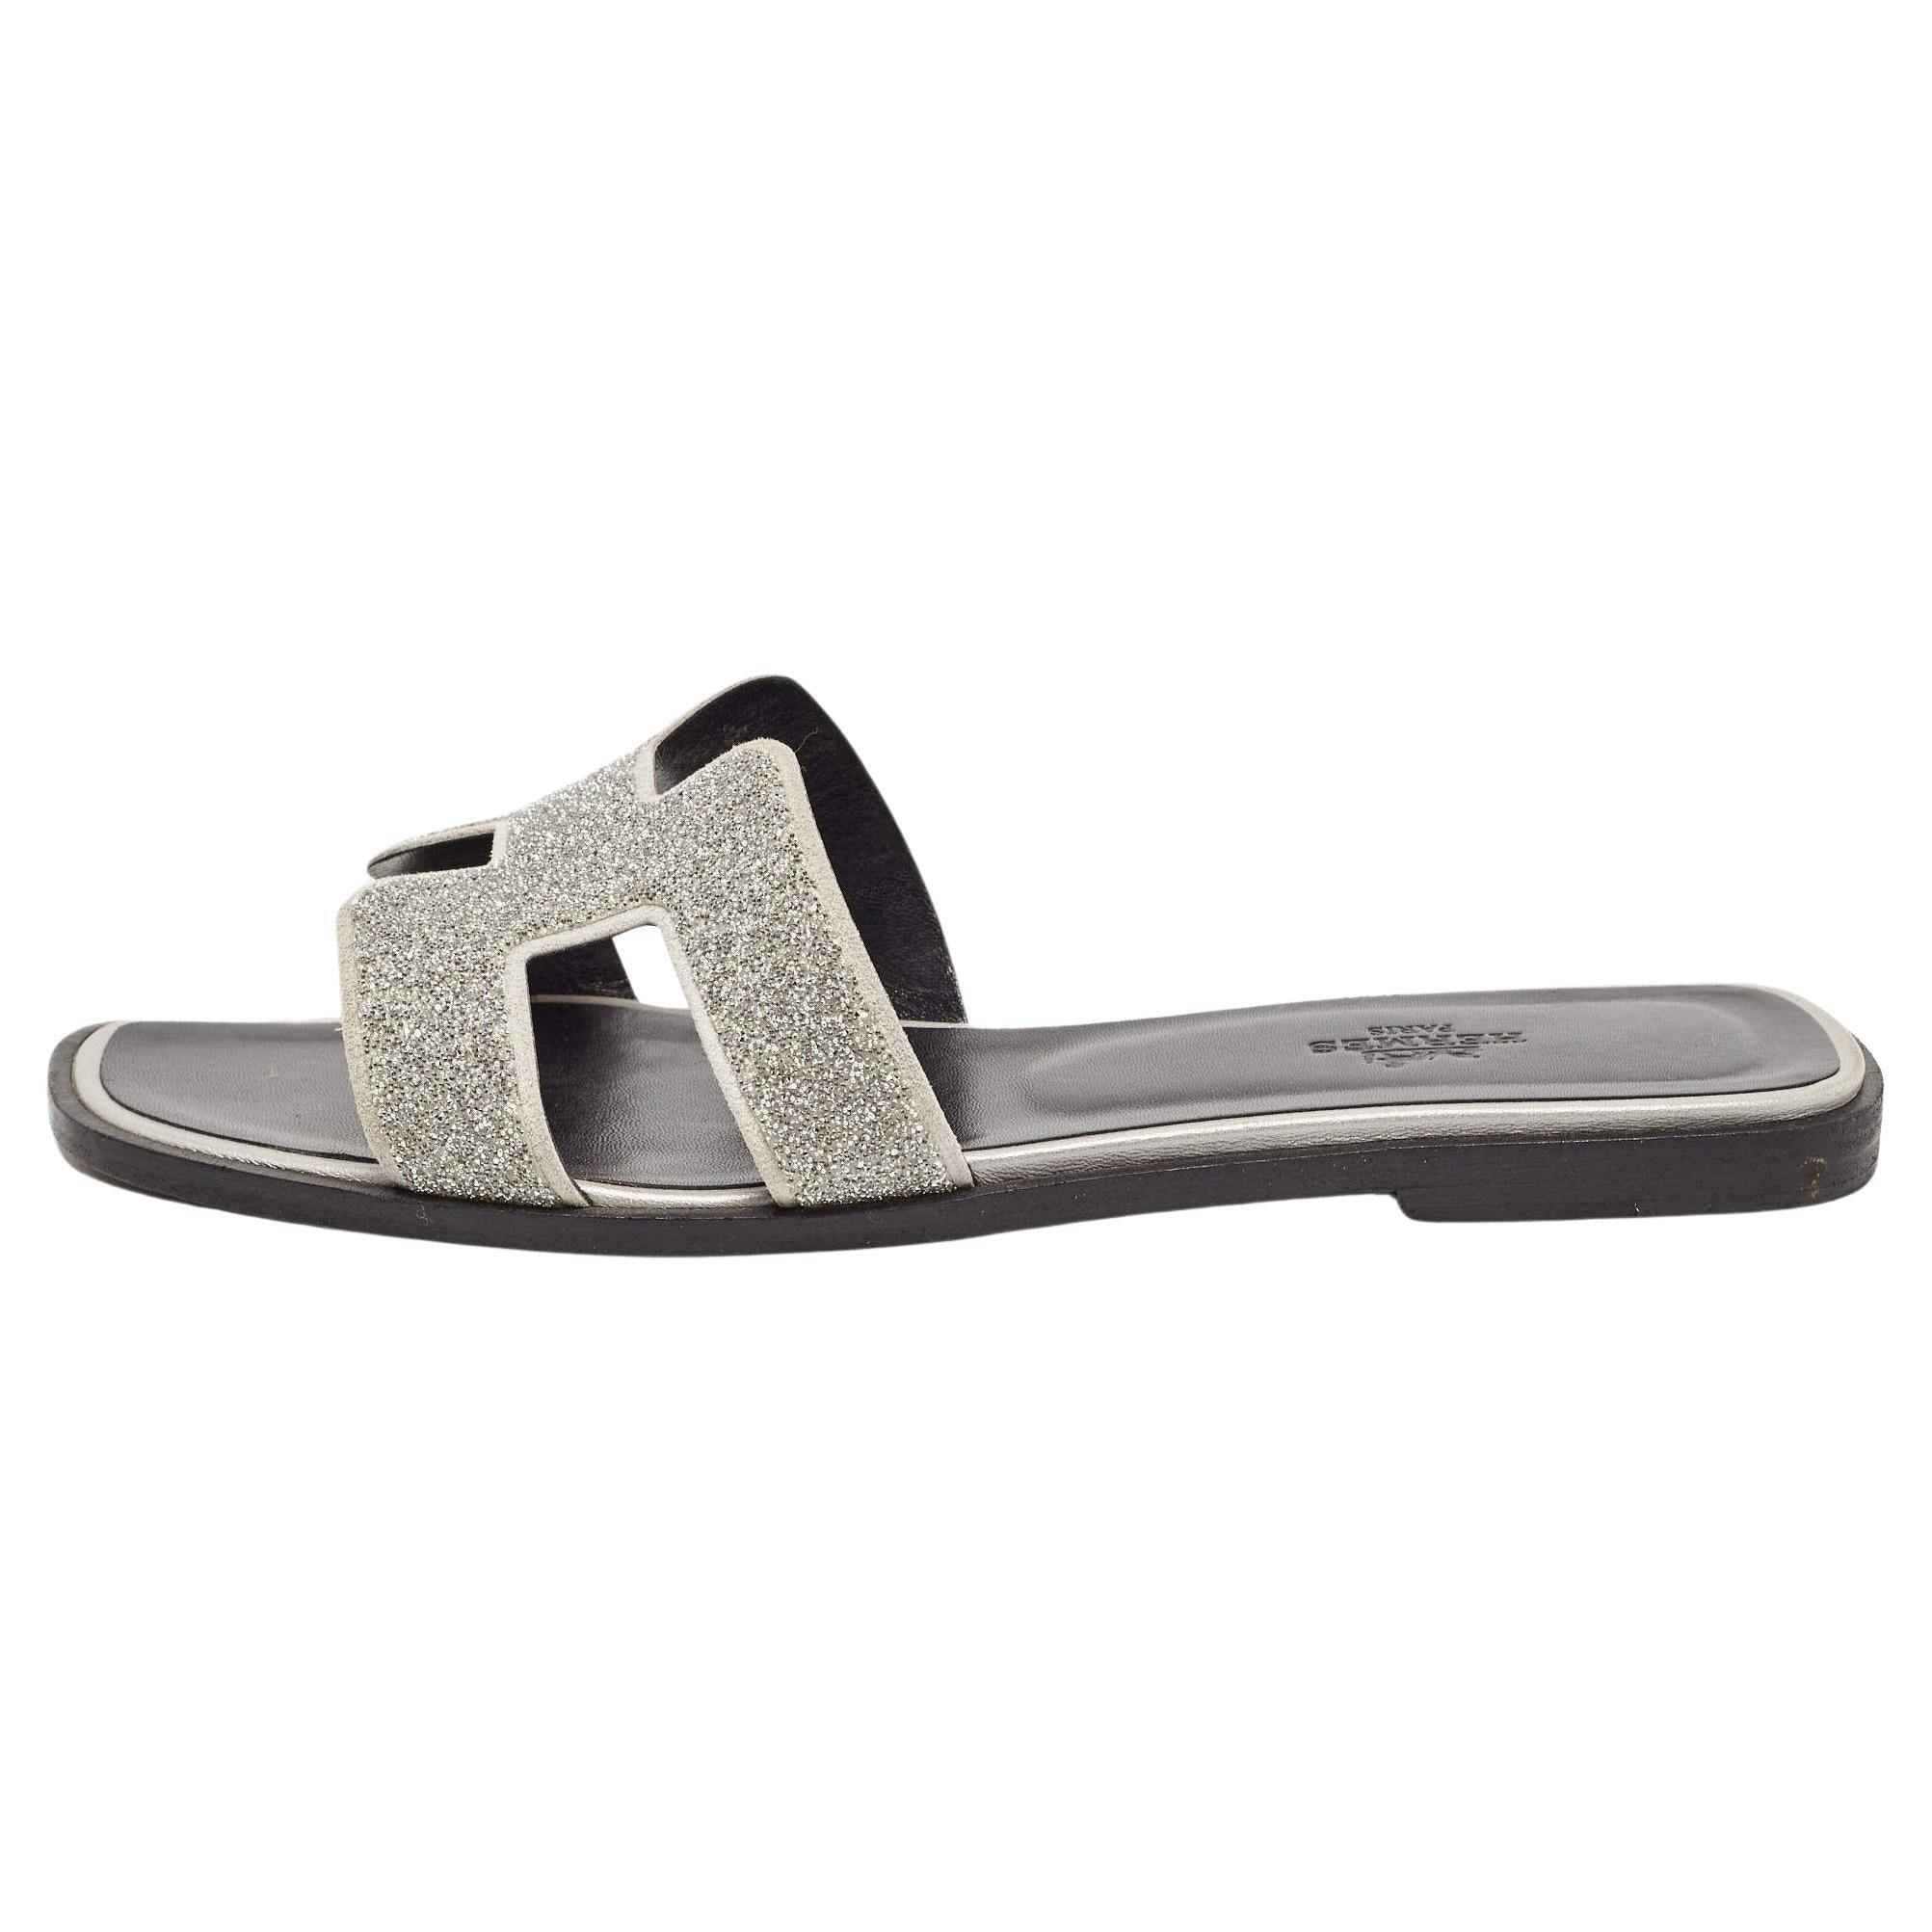 Hermes Silver Suede and Glitter Opne Toe Flat Oran Slides Size 38.5